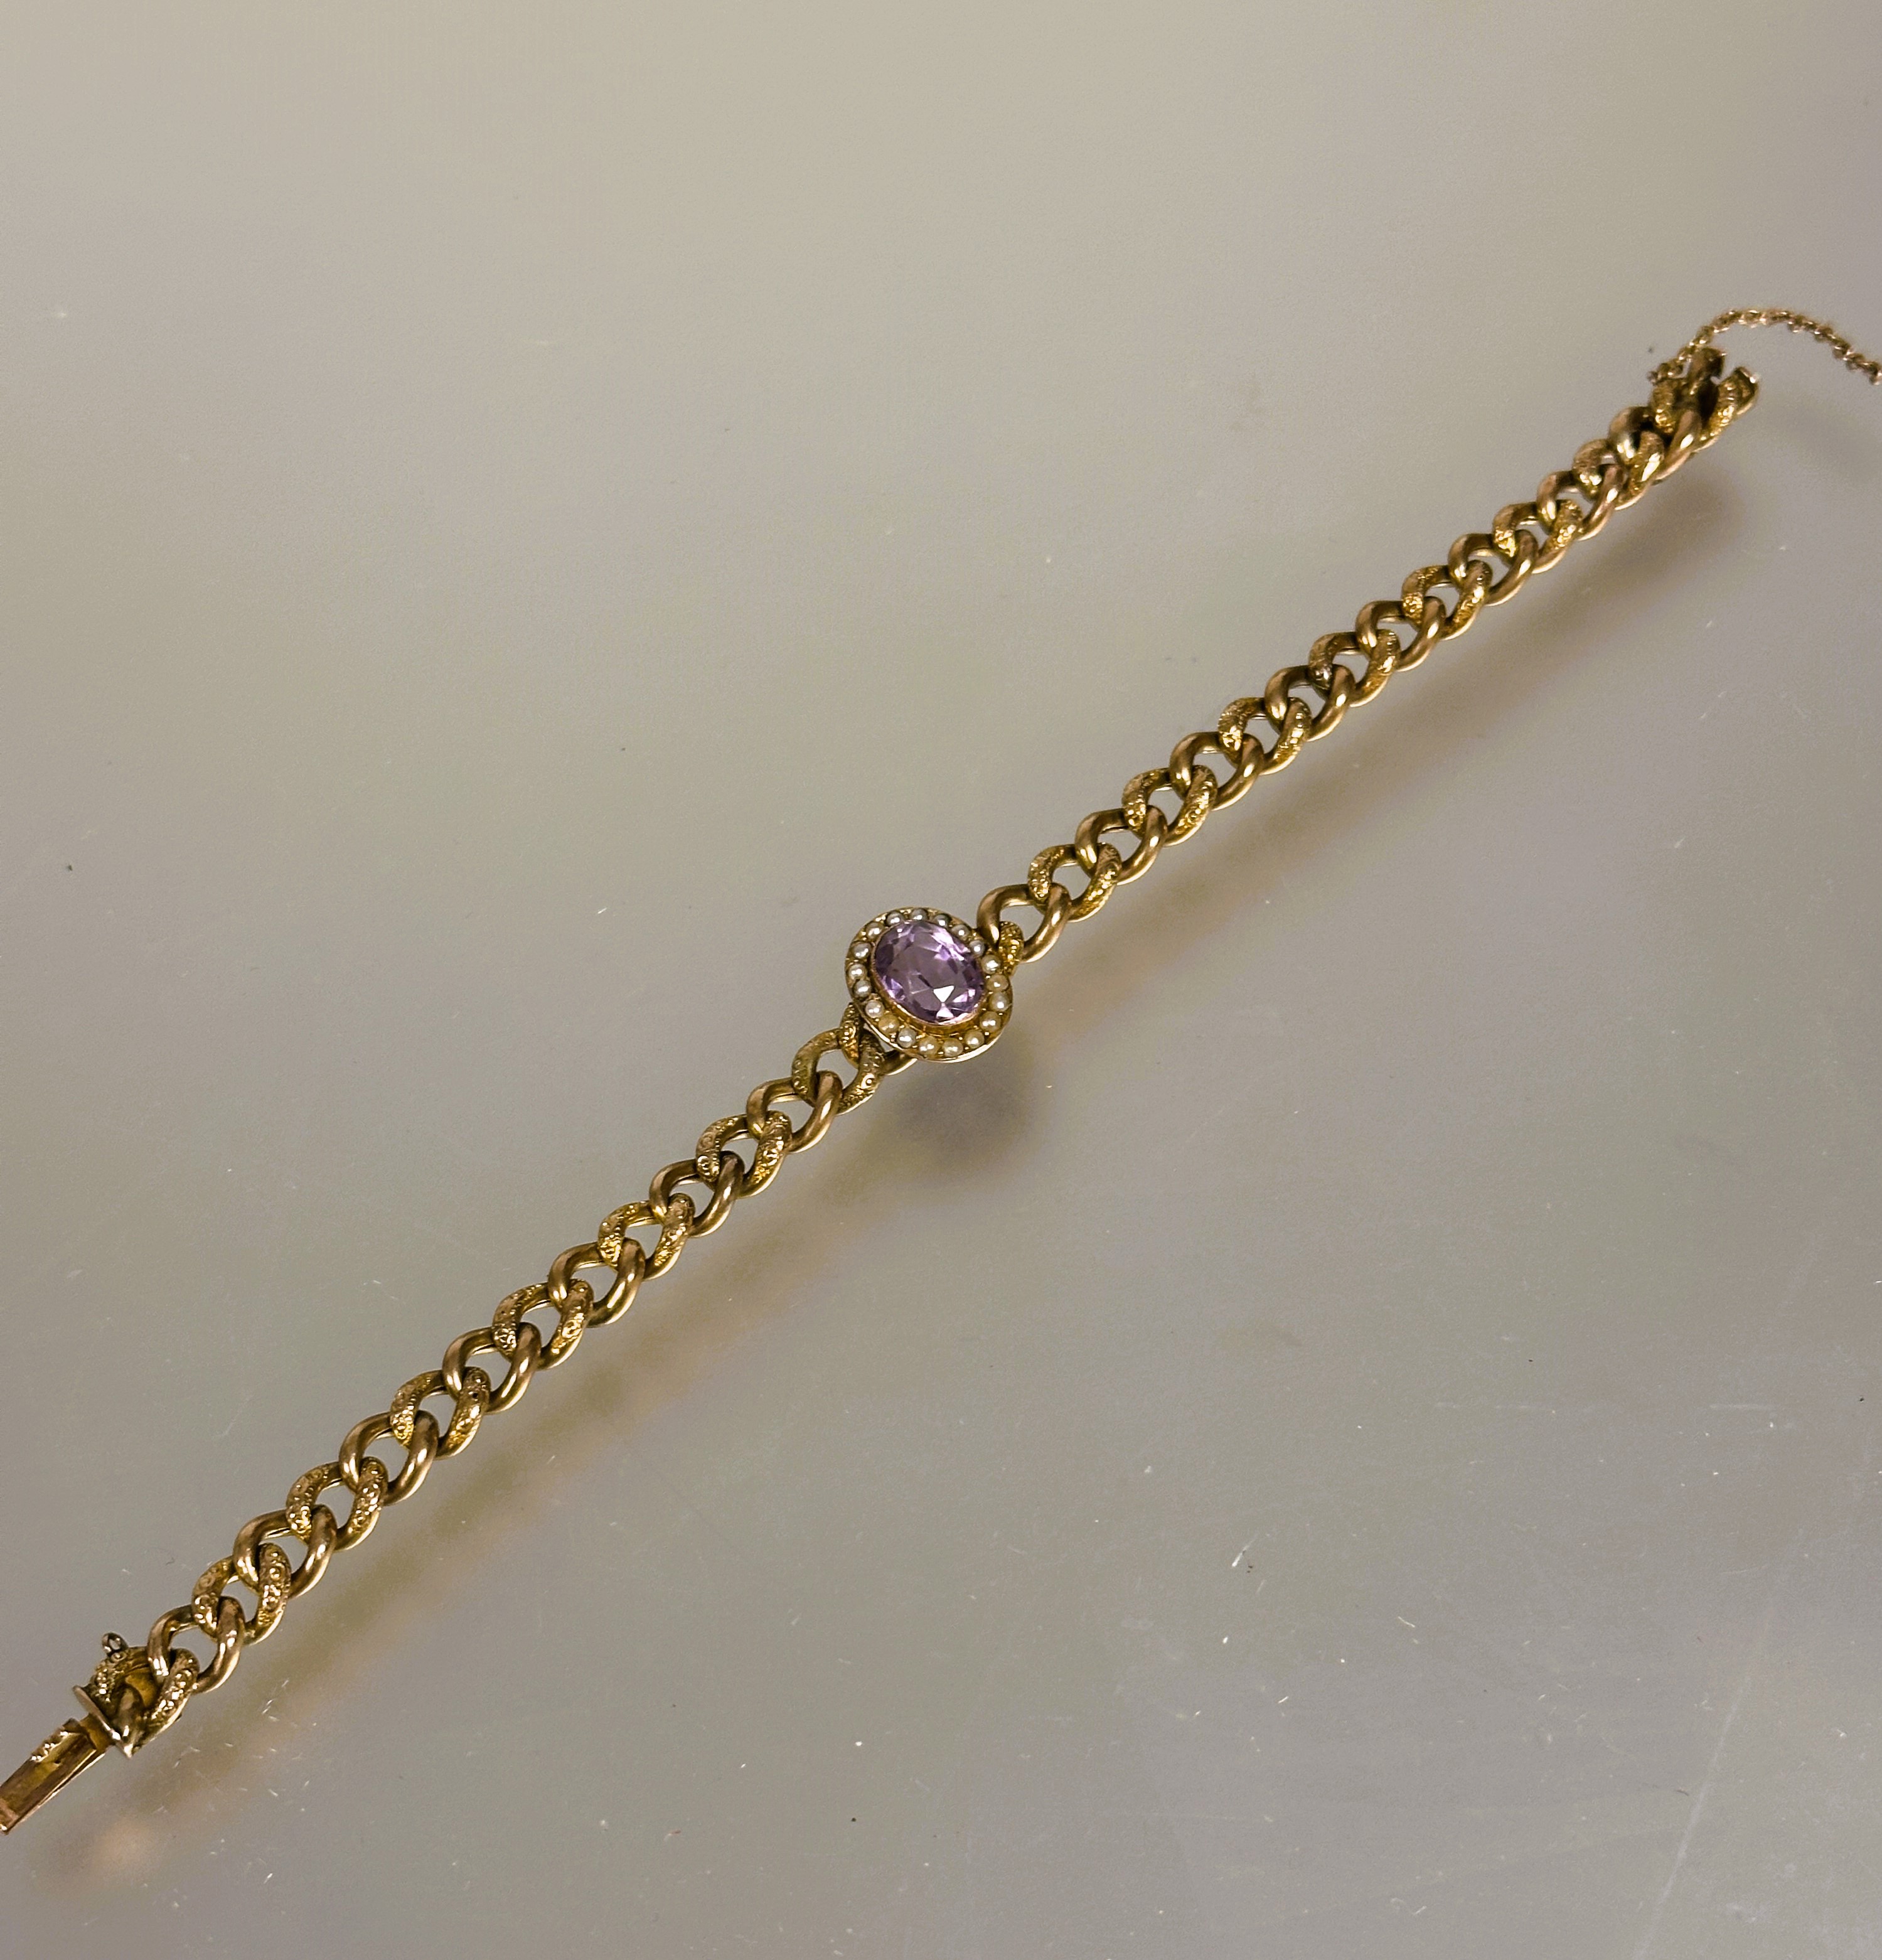 A late 19thc 9ct gold engraved kerb link chain bracelet with clasp fastening and safety chain